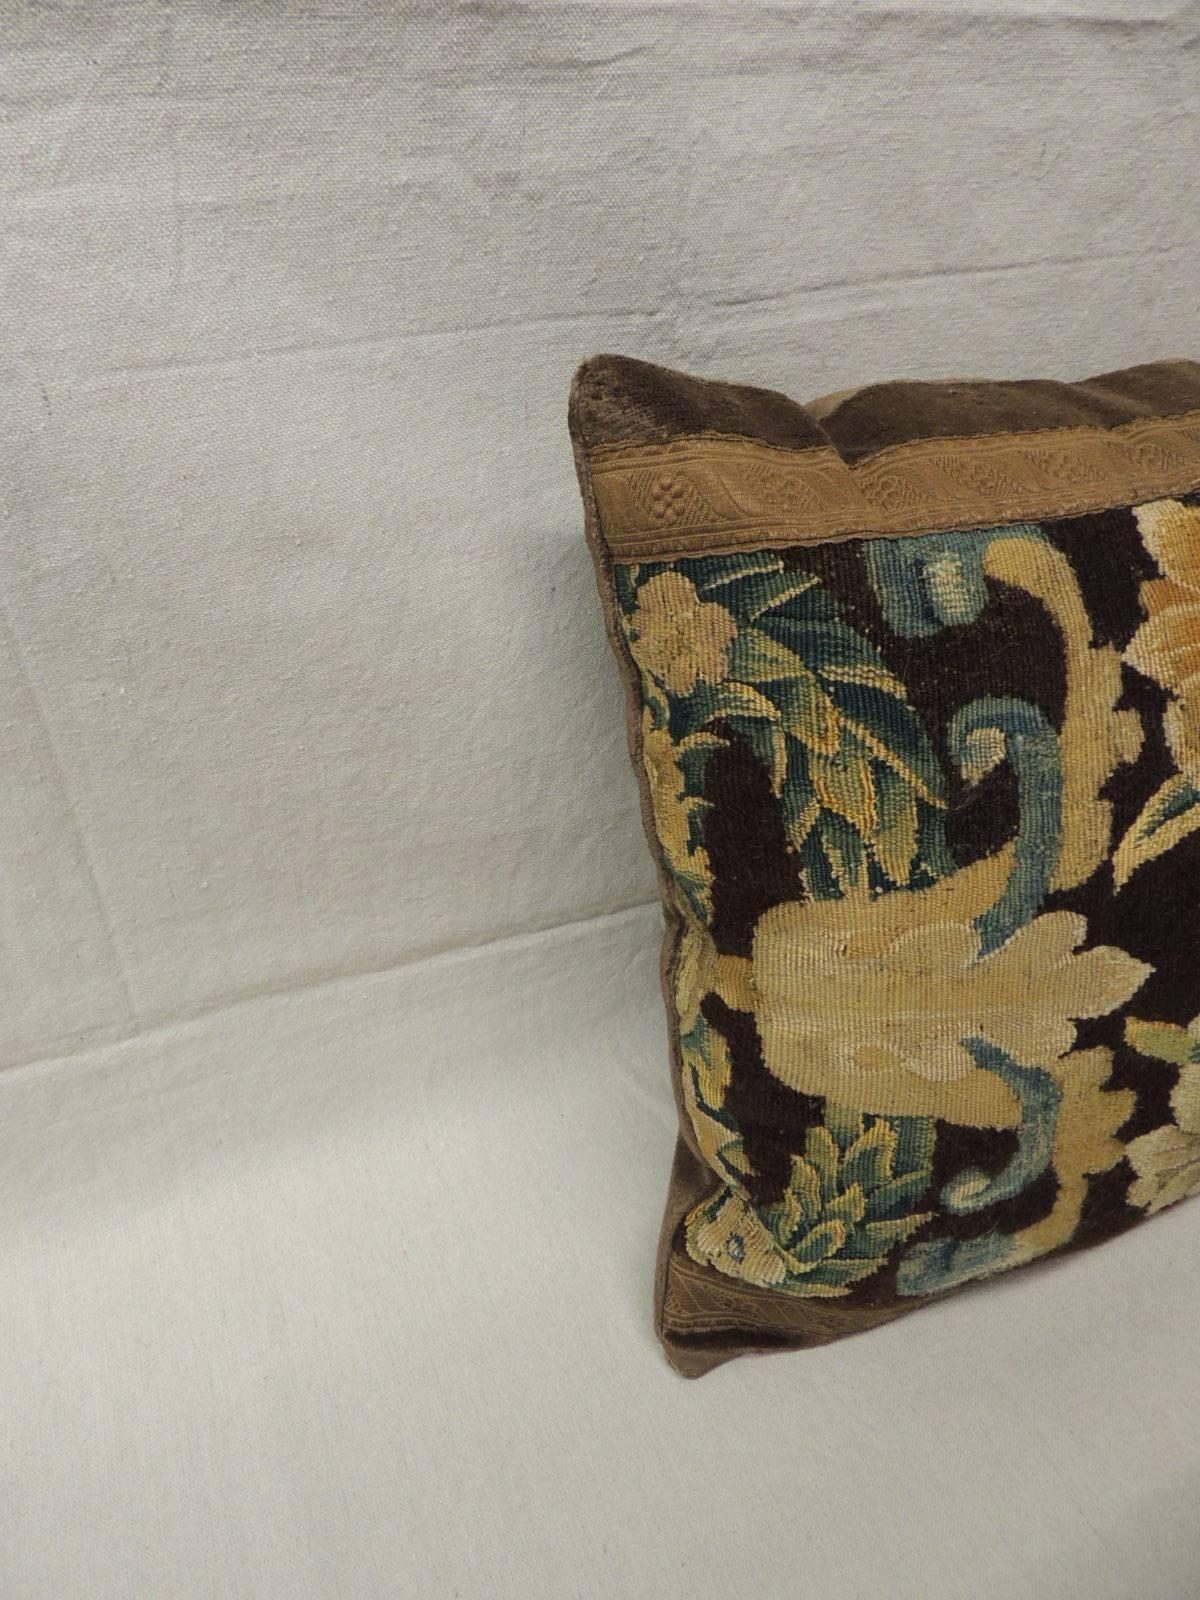 18th century Flemish tapestry bolster pillow with a classic floral design in shades of green, gold, hunted green and blue on a brown background.
Tapestry is accentuated with an antique metallic trim. Brown velvet frame and backing. Size: 29 x 18 x